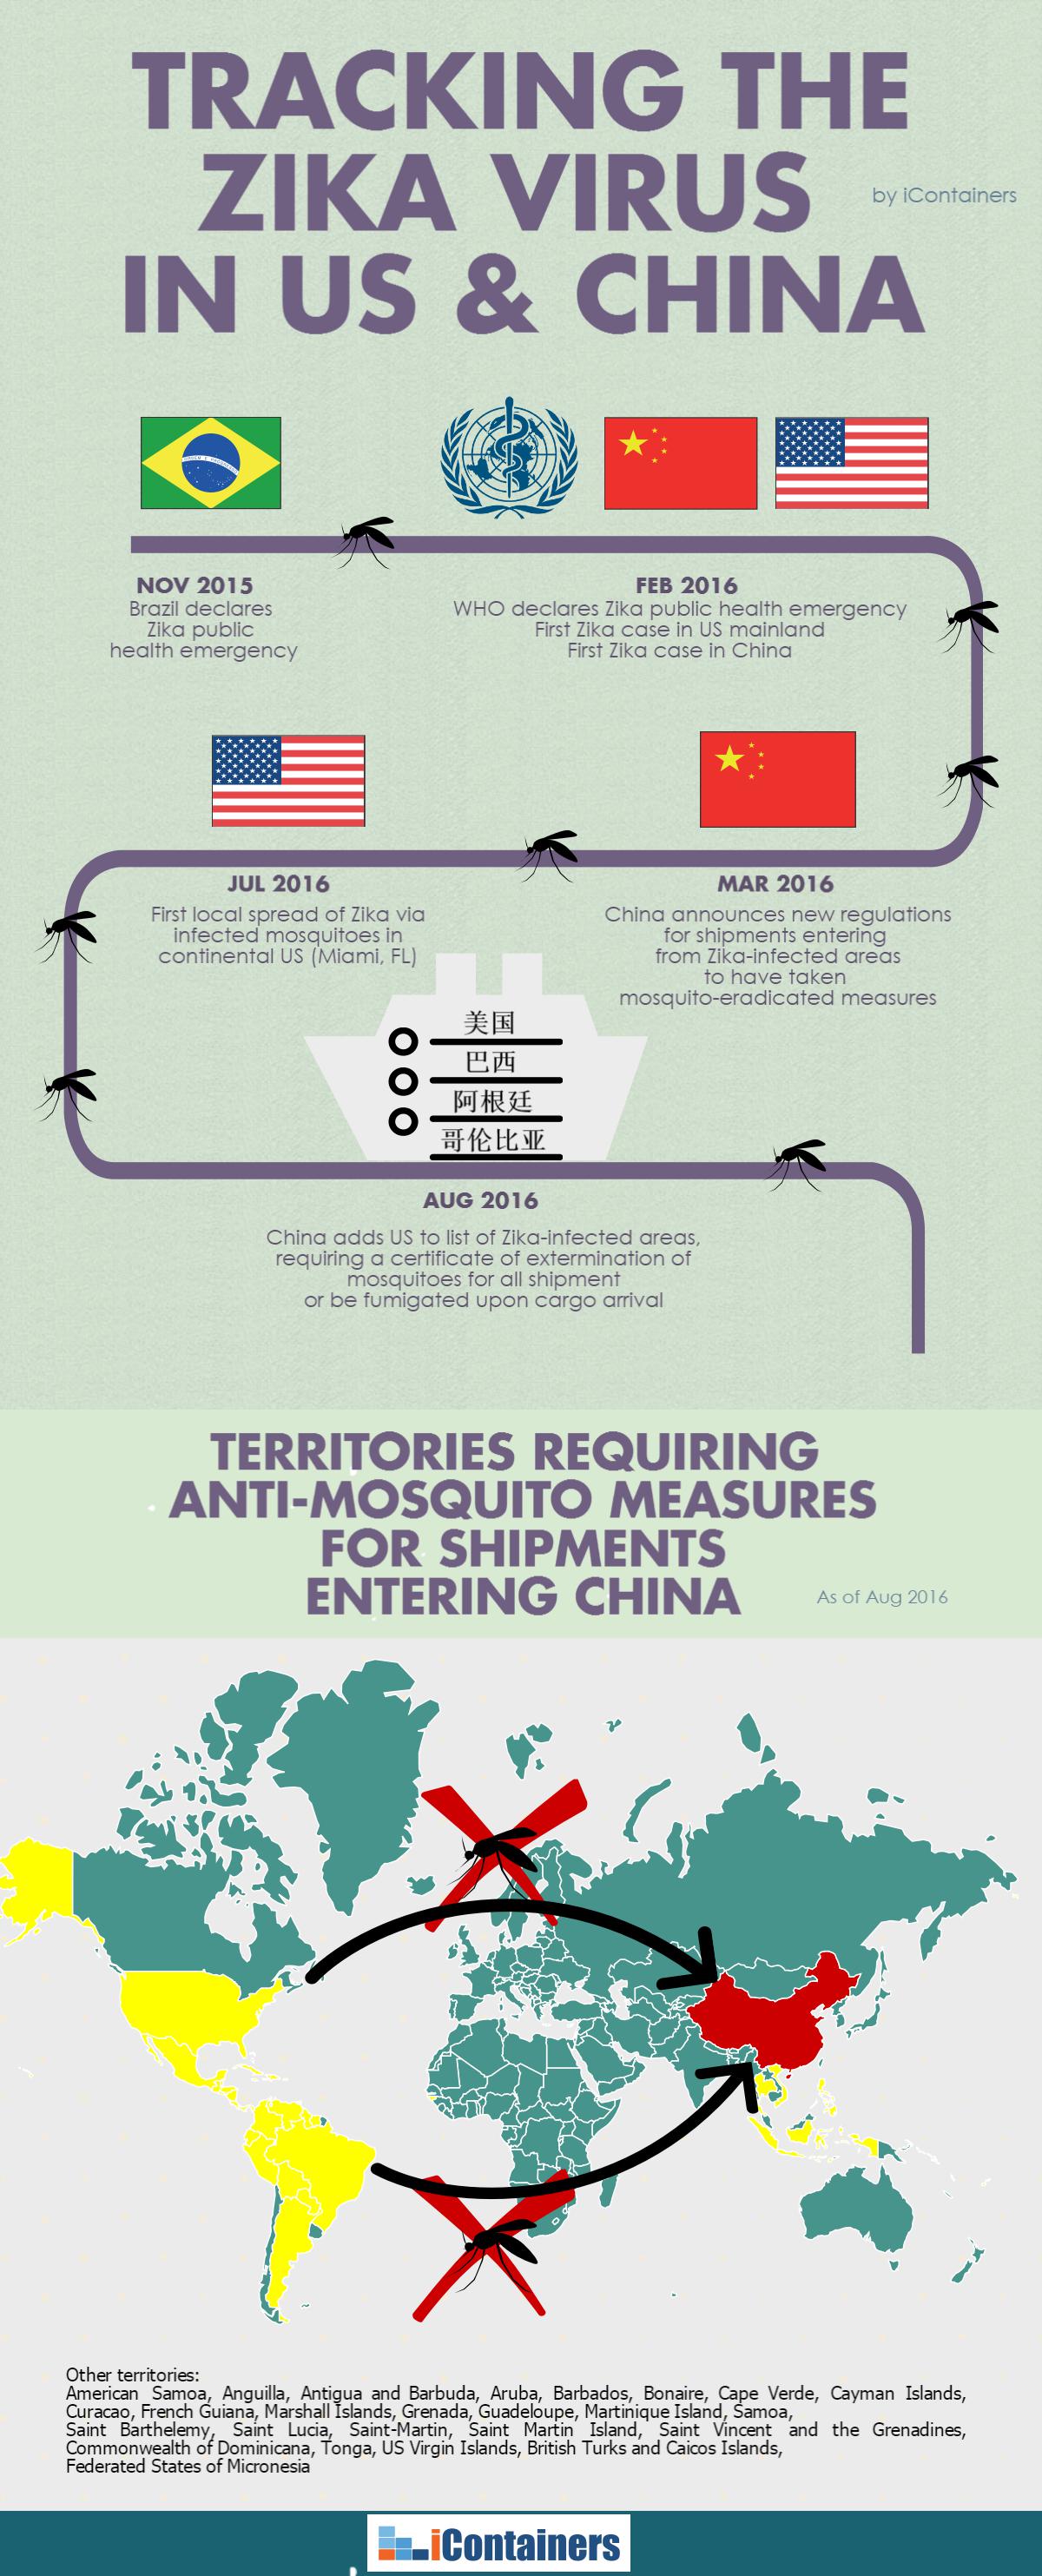 UPDATED: Anti-Zika treatment for US exports to China - iContainers